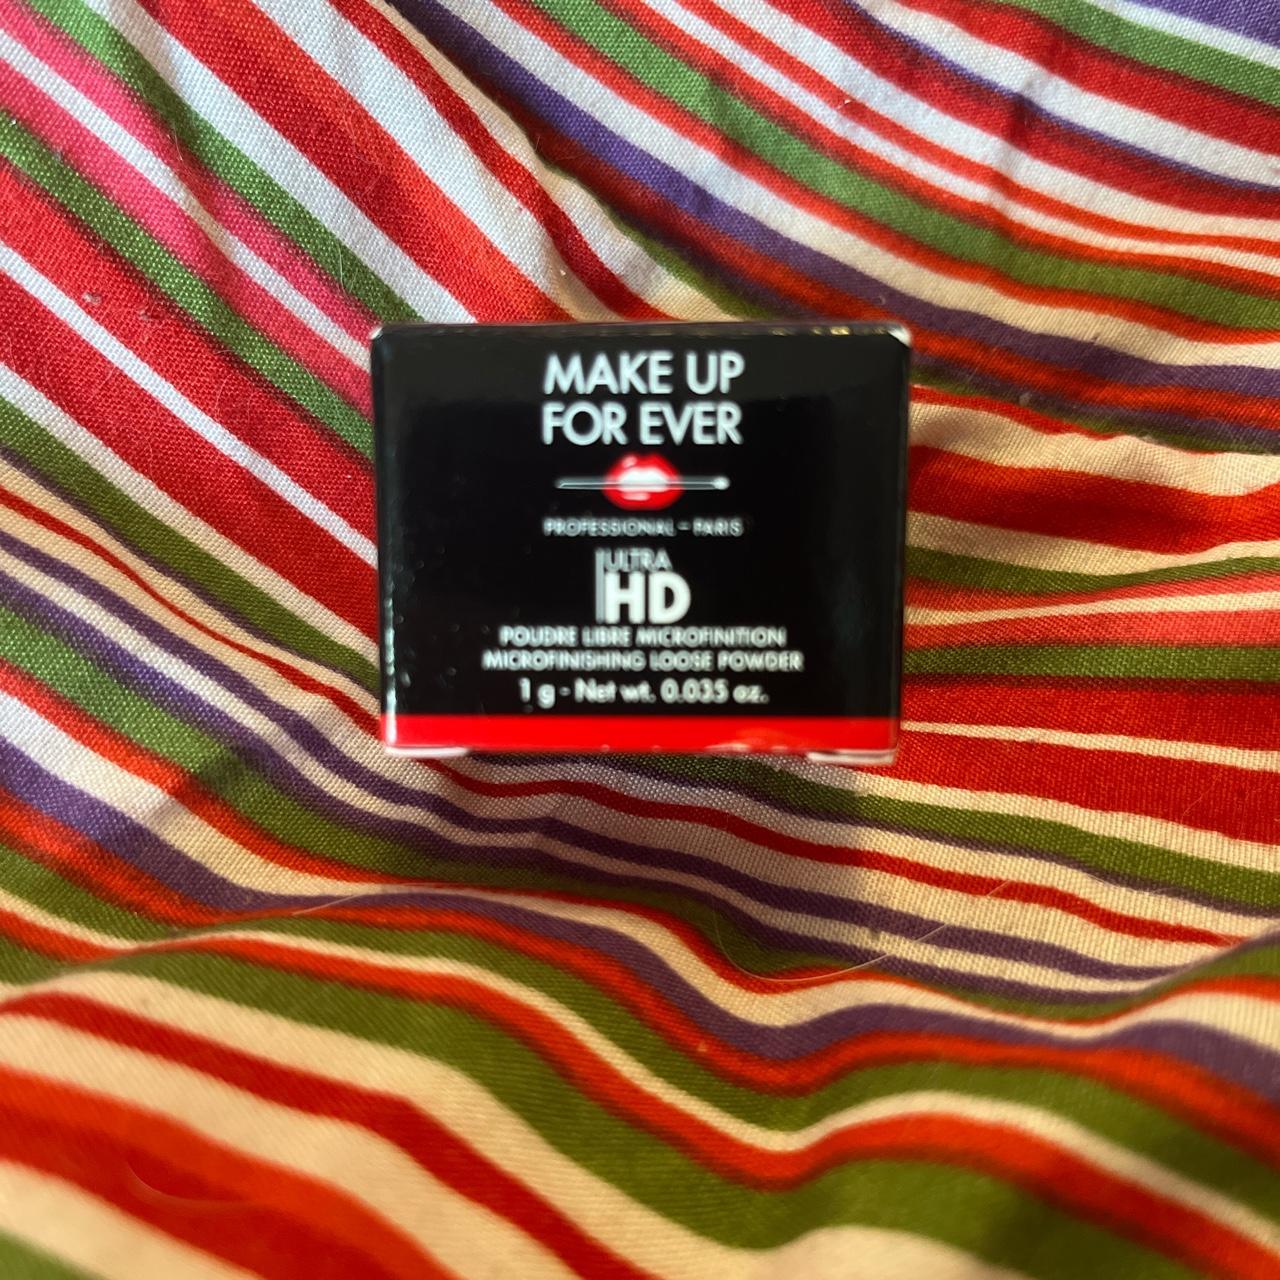 Product Image 1 - Make up forever ultra hd